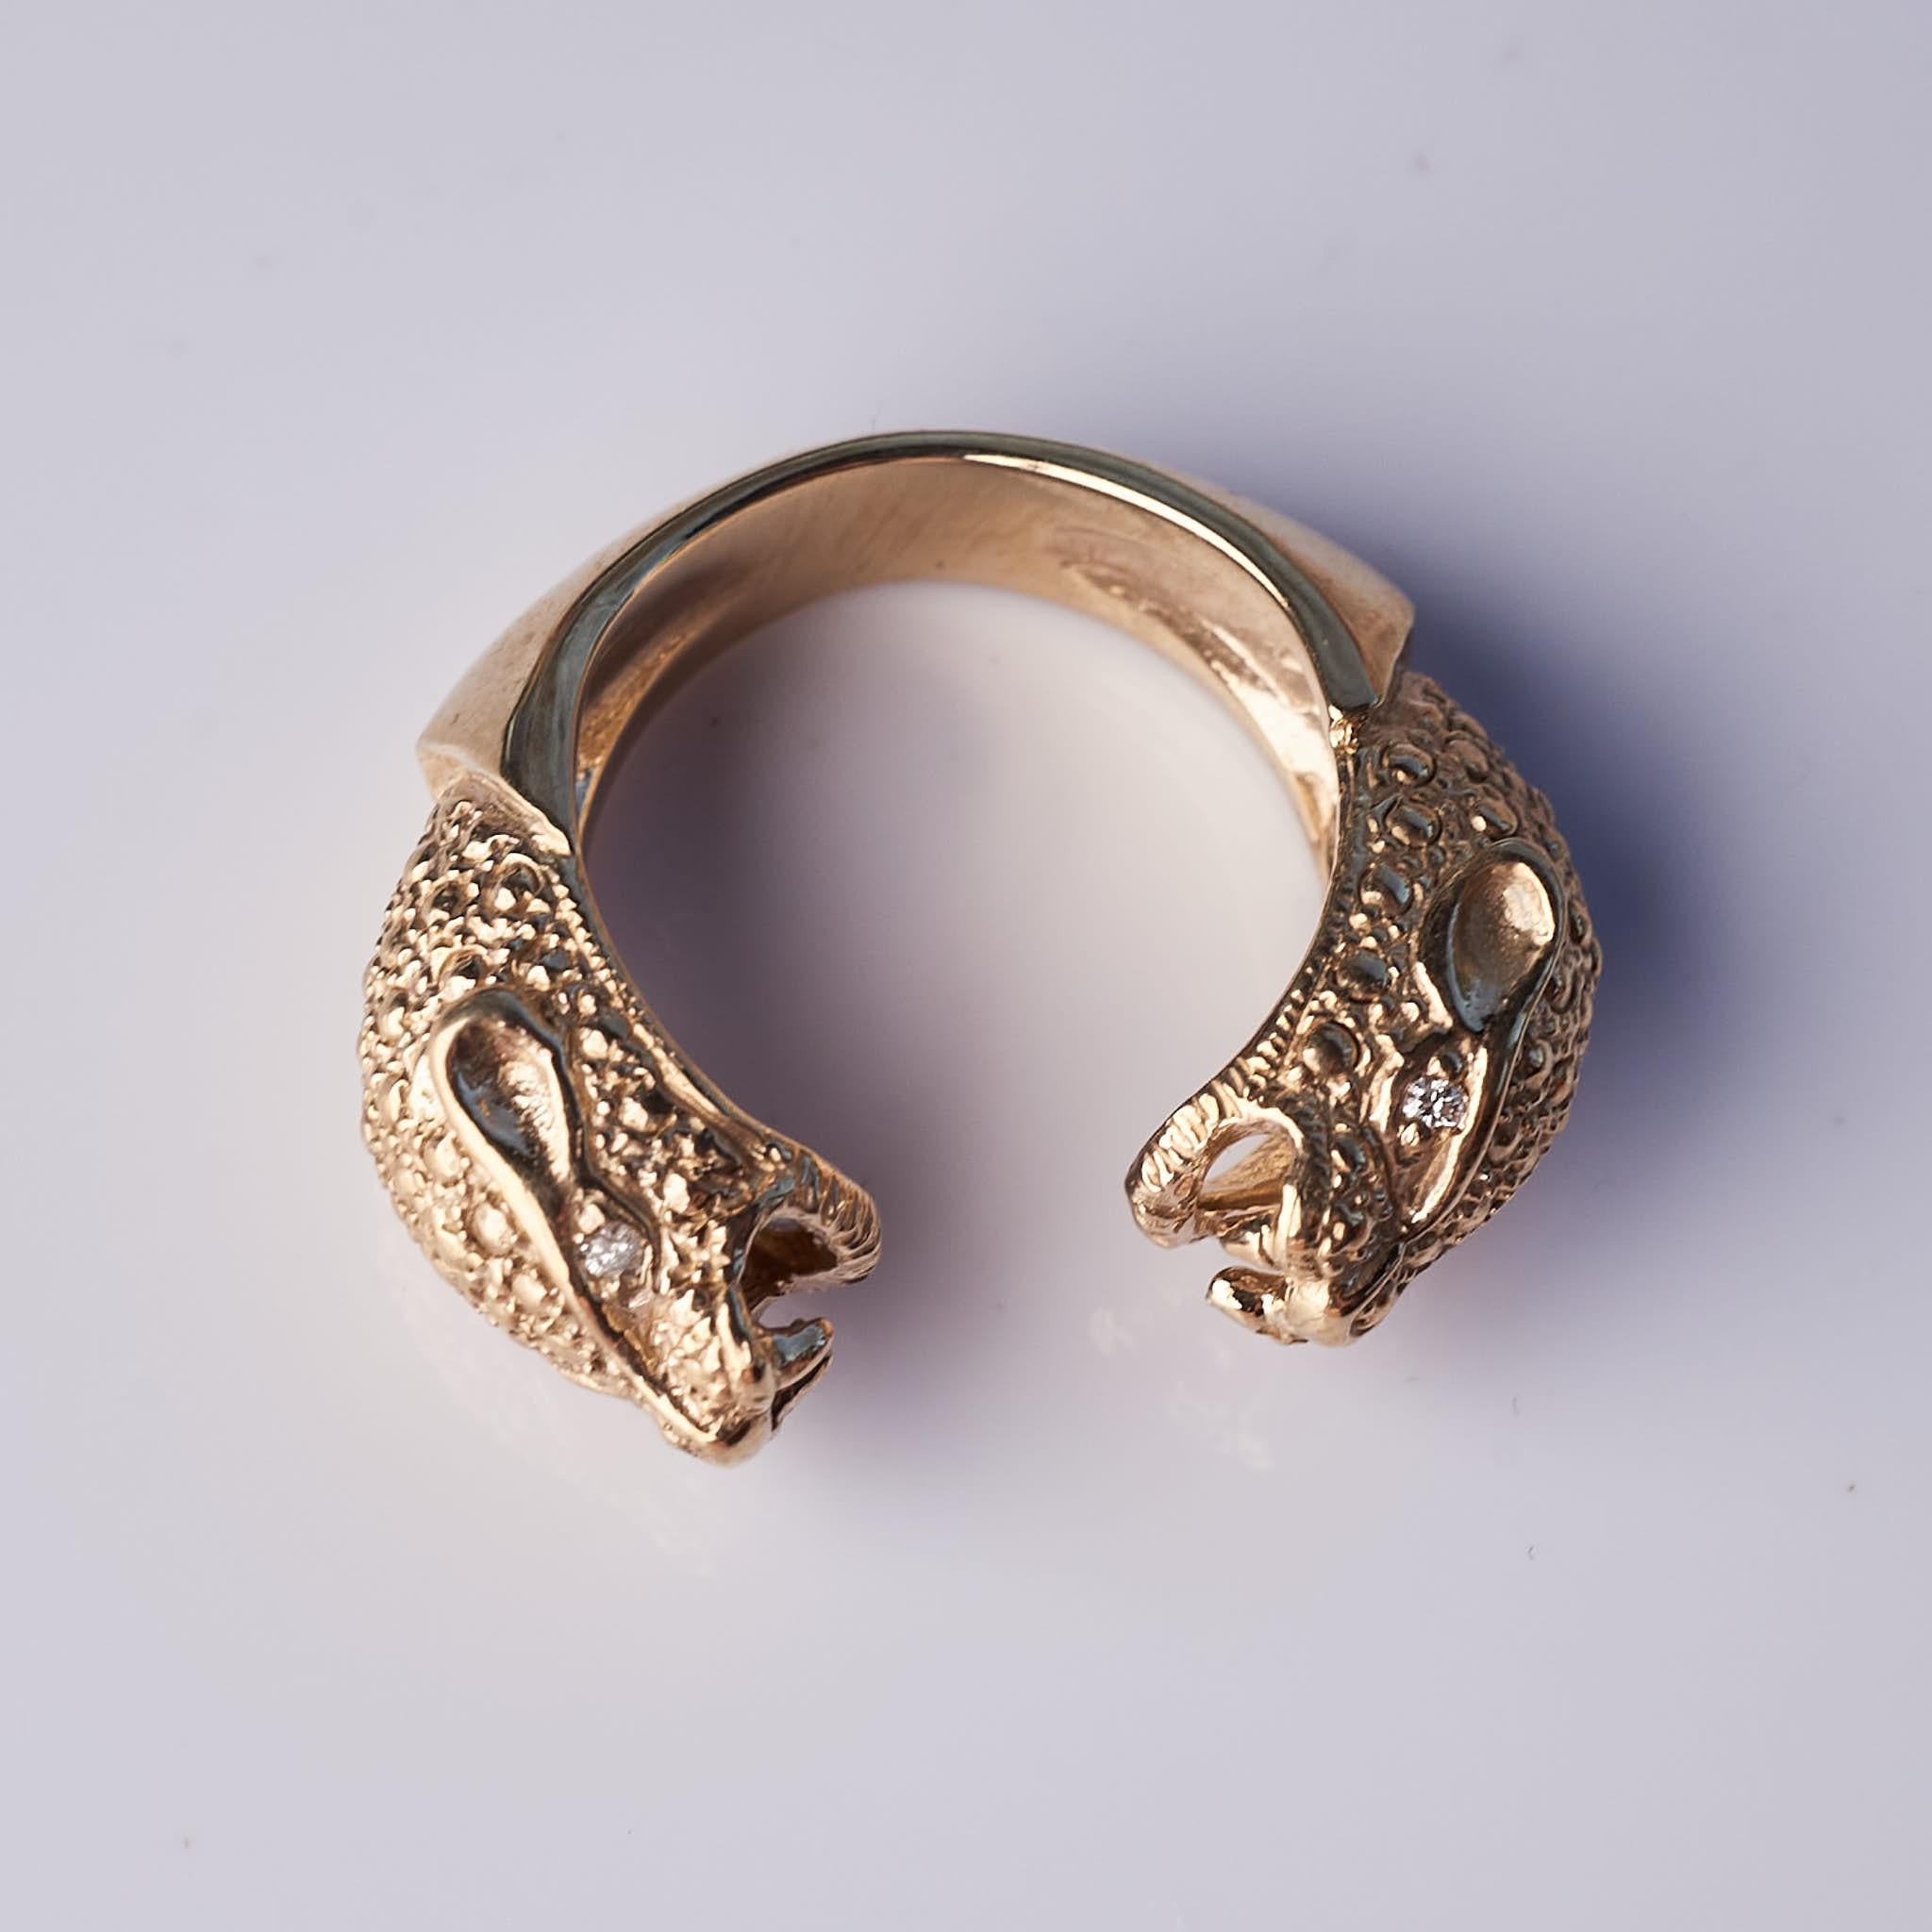 White Diamond Jaguar Panther Ring Bronze Animal Jewelry J Dauphin In New Condition For Sale In Los Angeles, CA